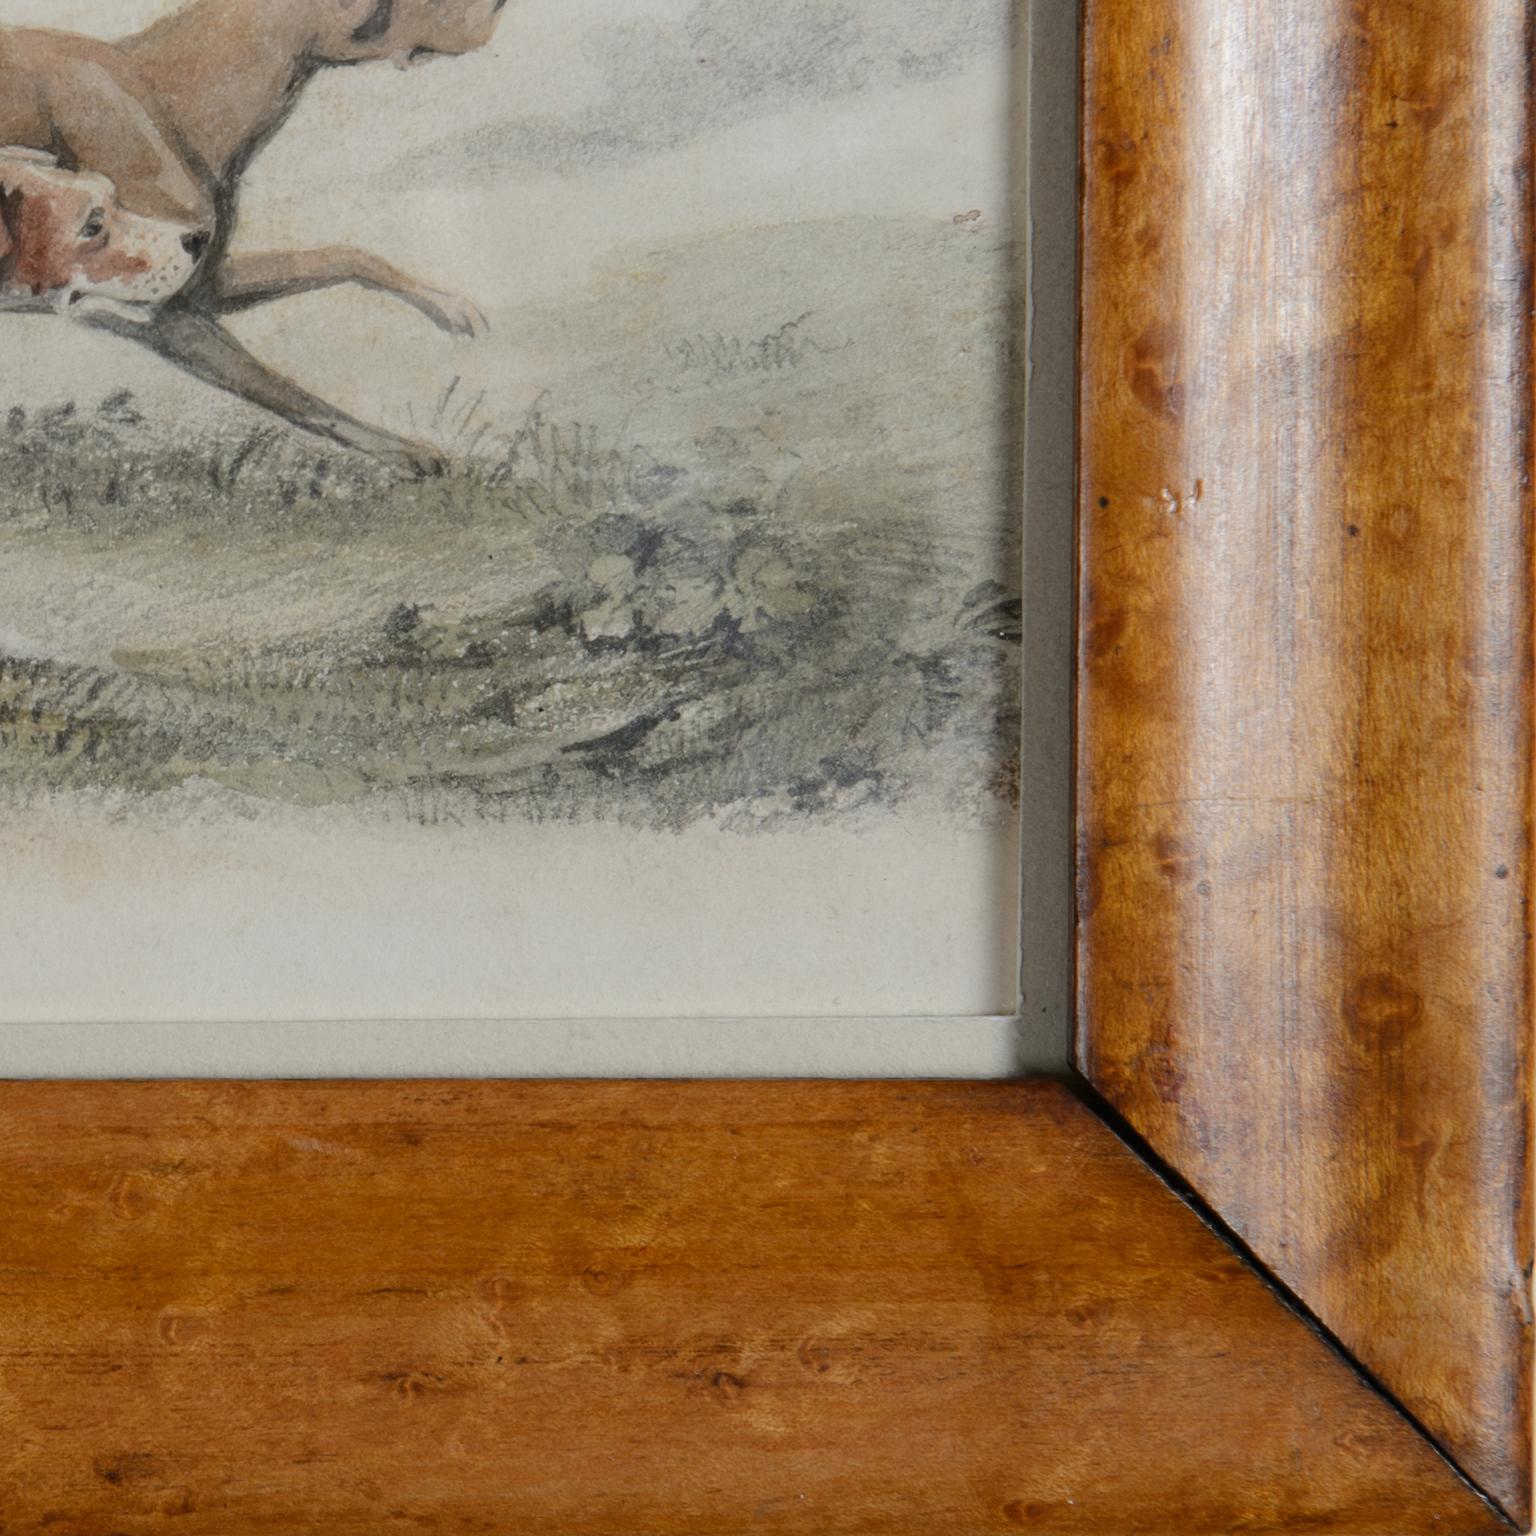 Two Pointers in a Landscape - 19th century watercolour of dogs - Victorian Art by Unknown